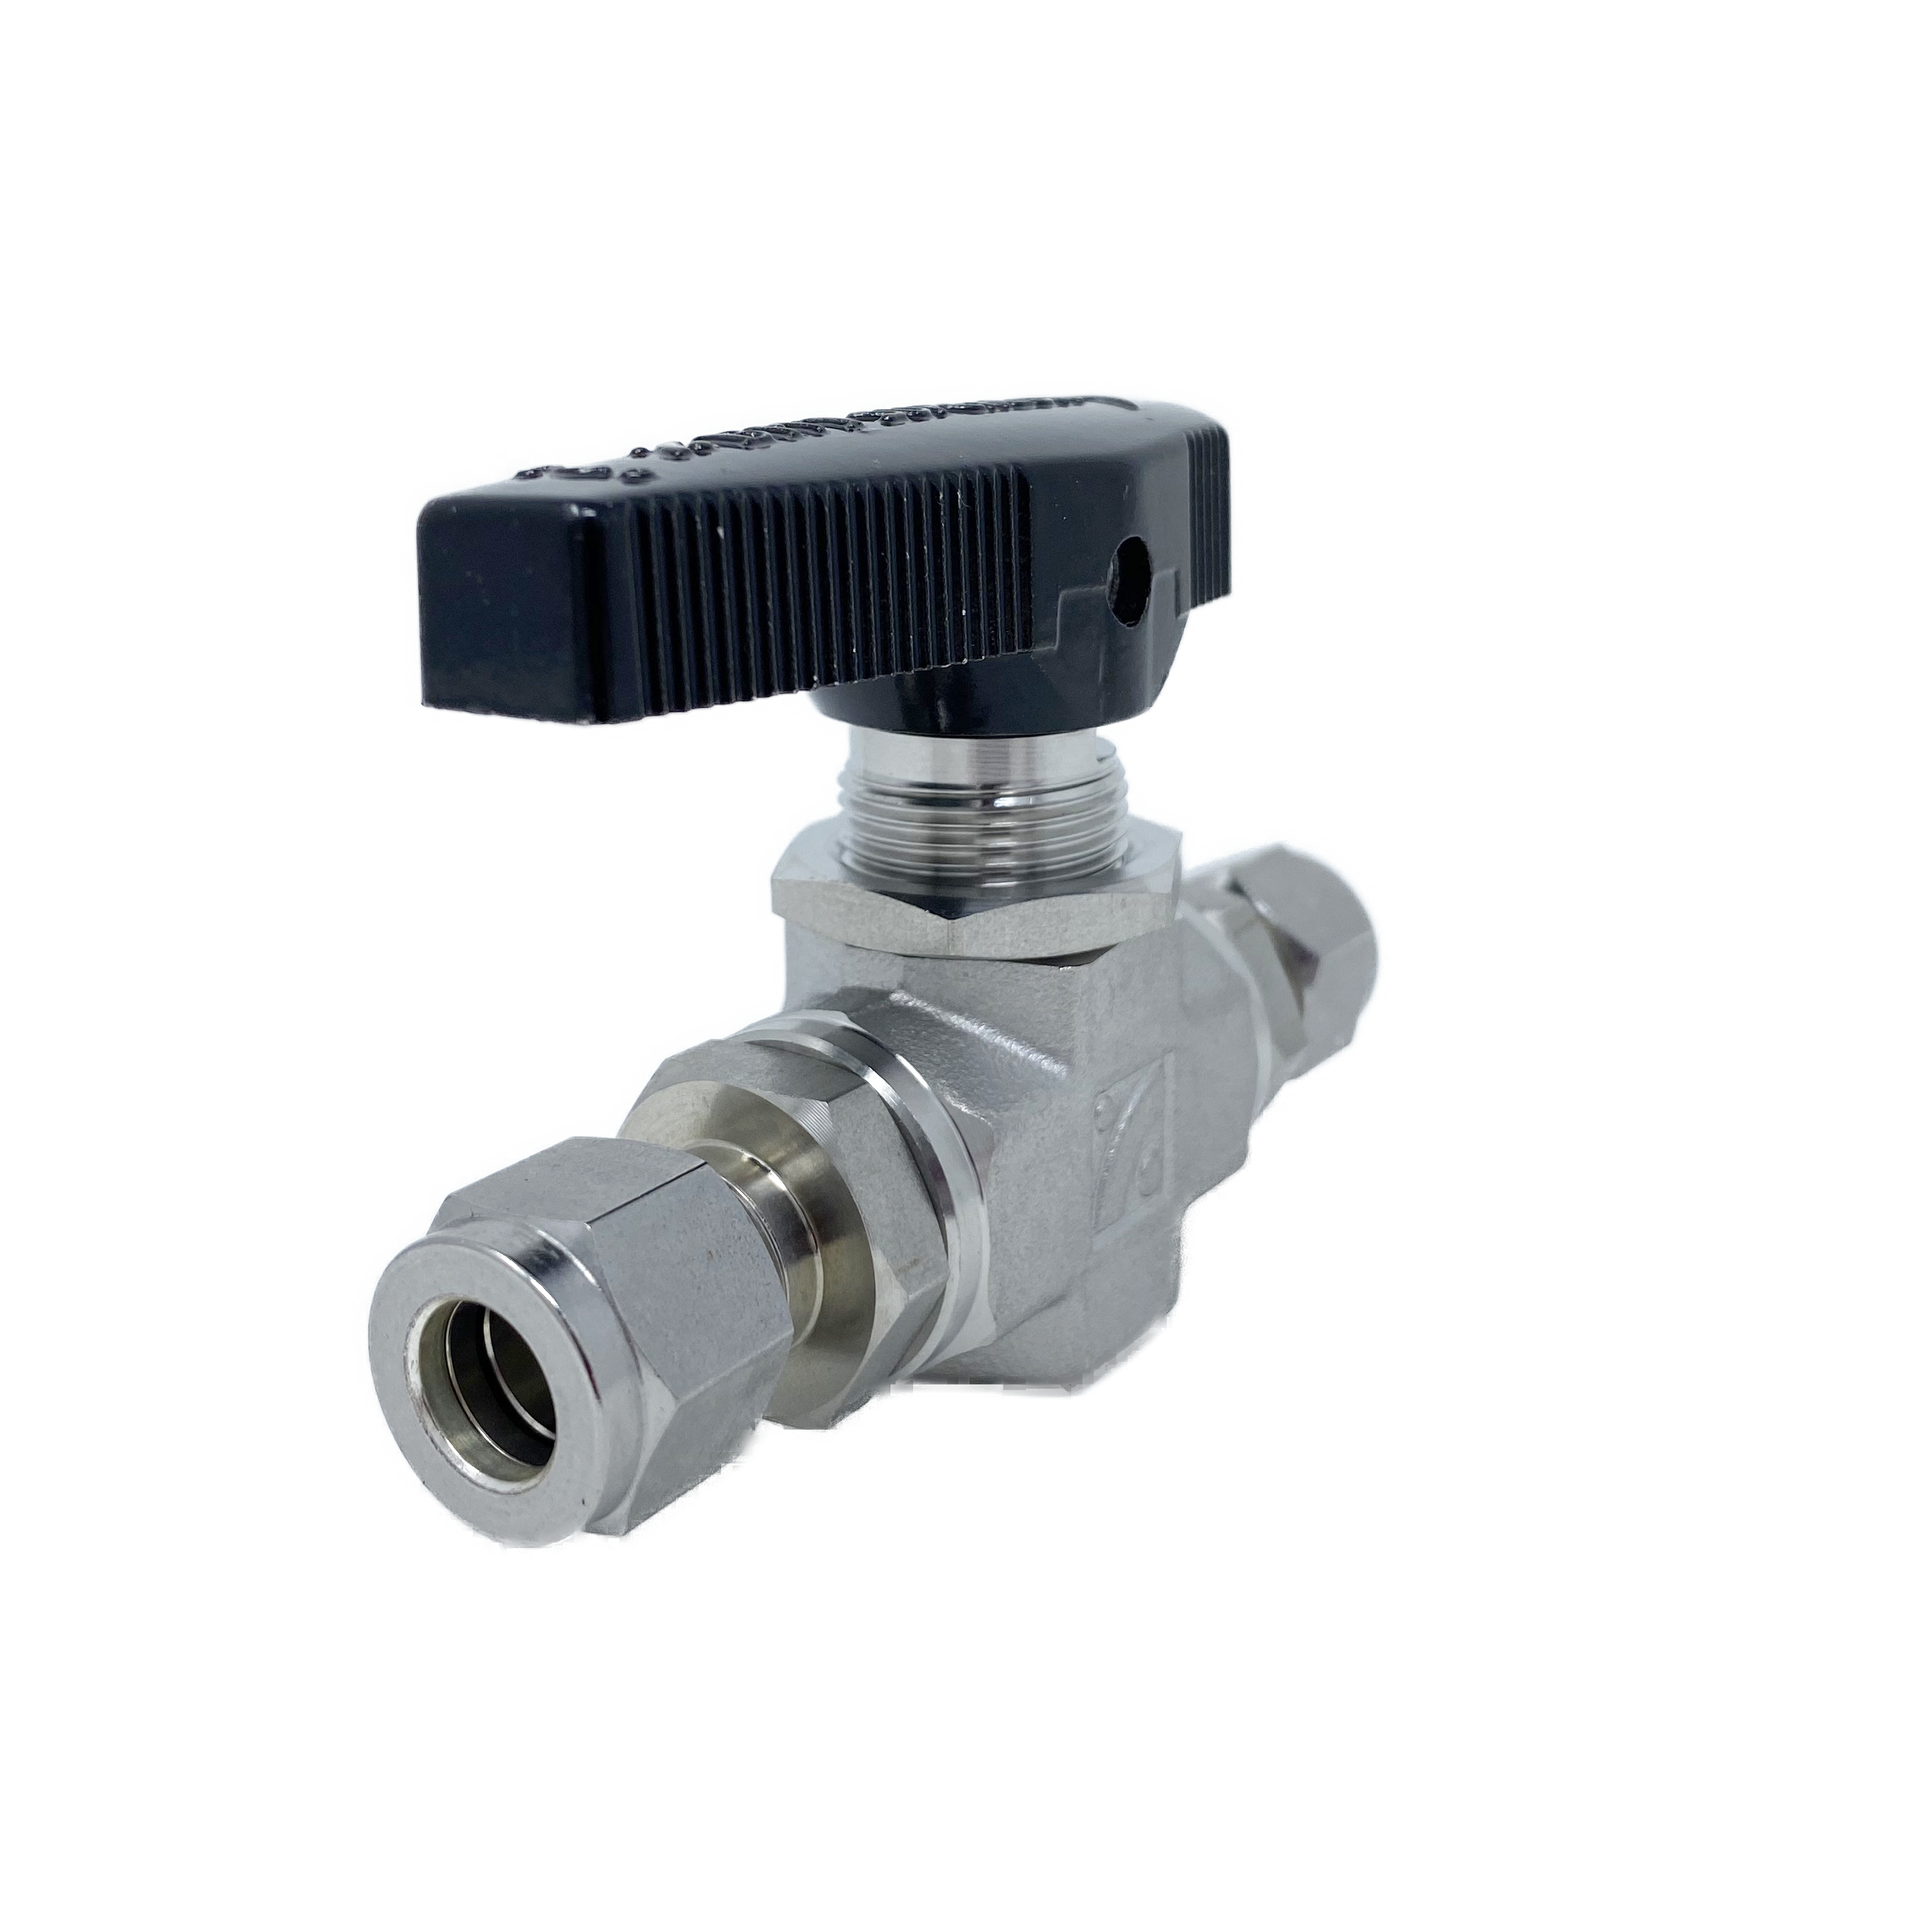 SBVF3602-F-4N-MR : Superlok Ball Valve, Forged High Pressure, 1/4" FNPT, NACE-Rated, 6000psi, 316SS